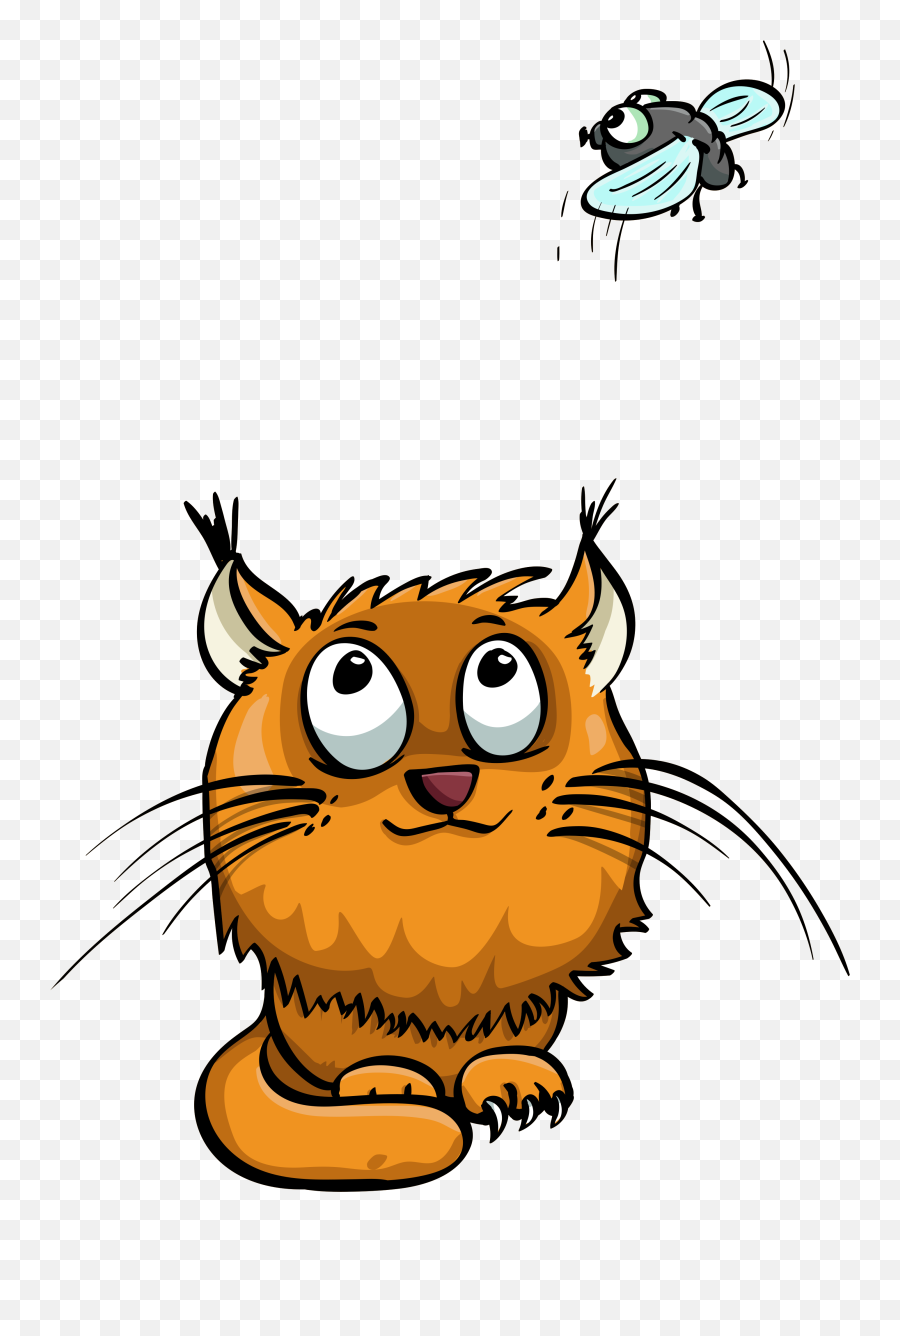 Animated Ginger Cat Hunting The Fly - Cat And Fly Cartoon Emoji,Hunting Cliparts